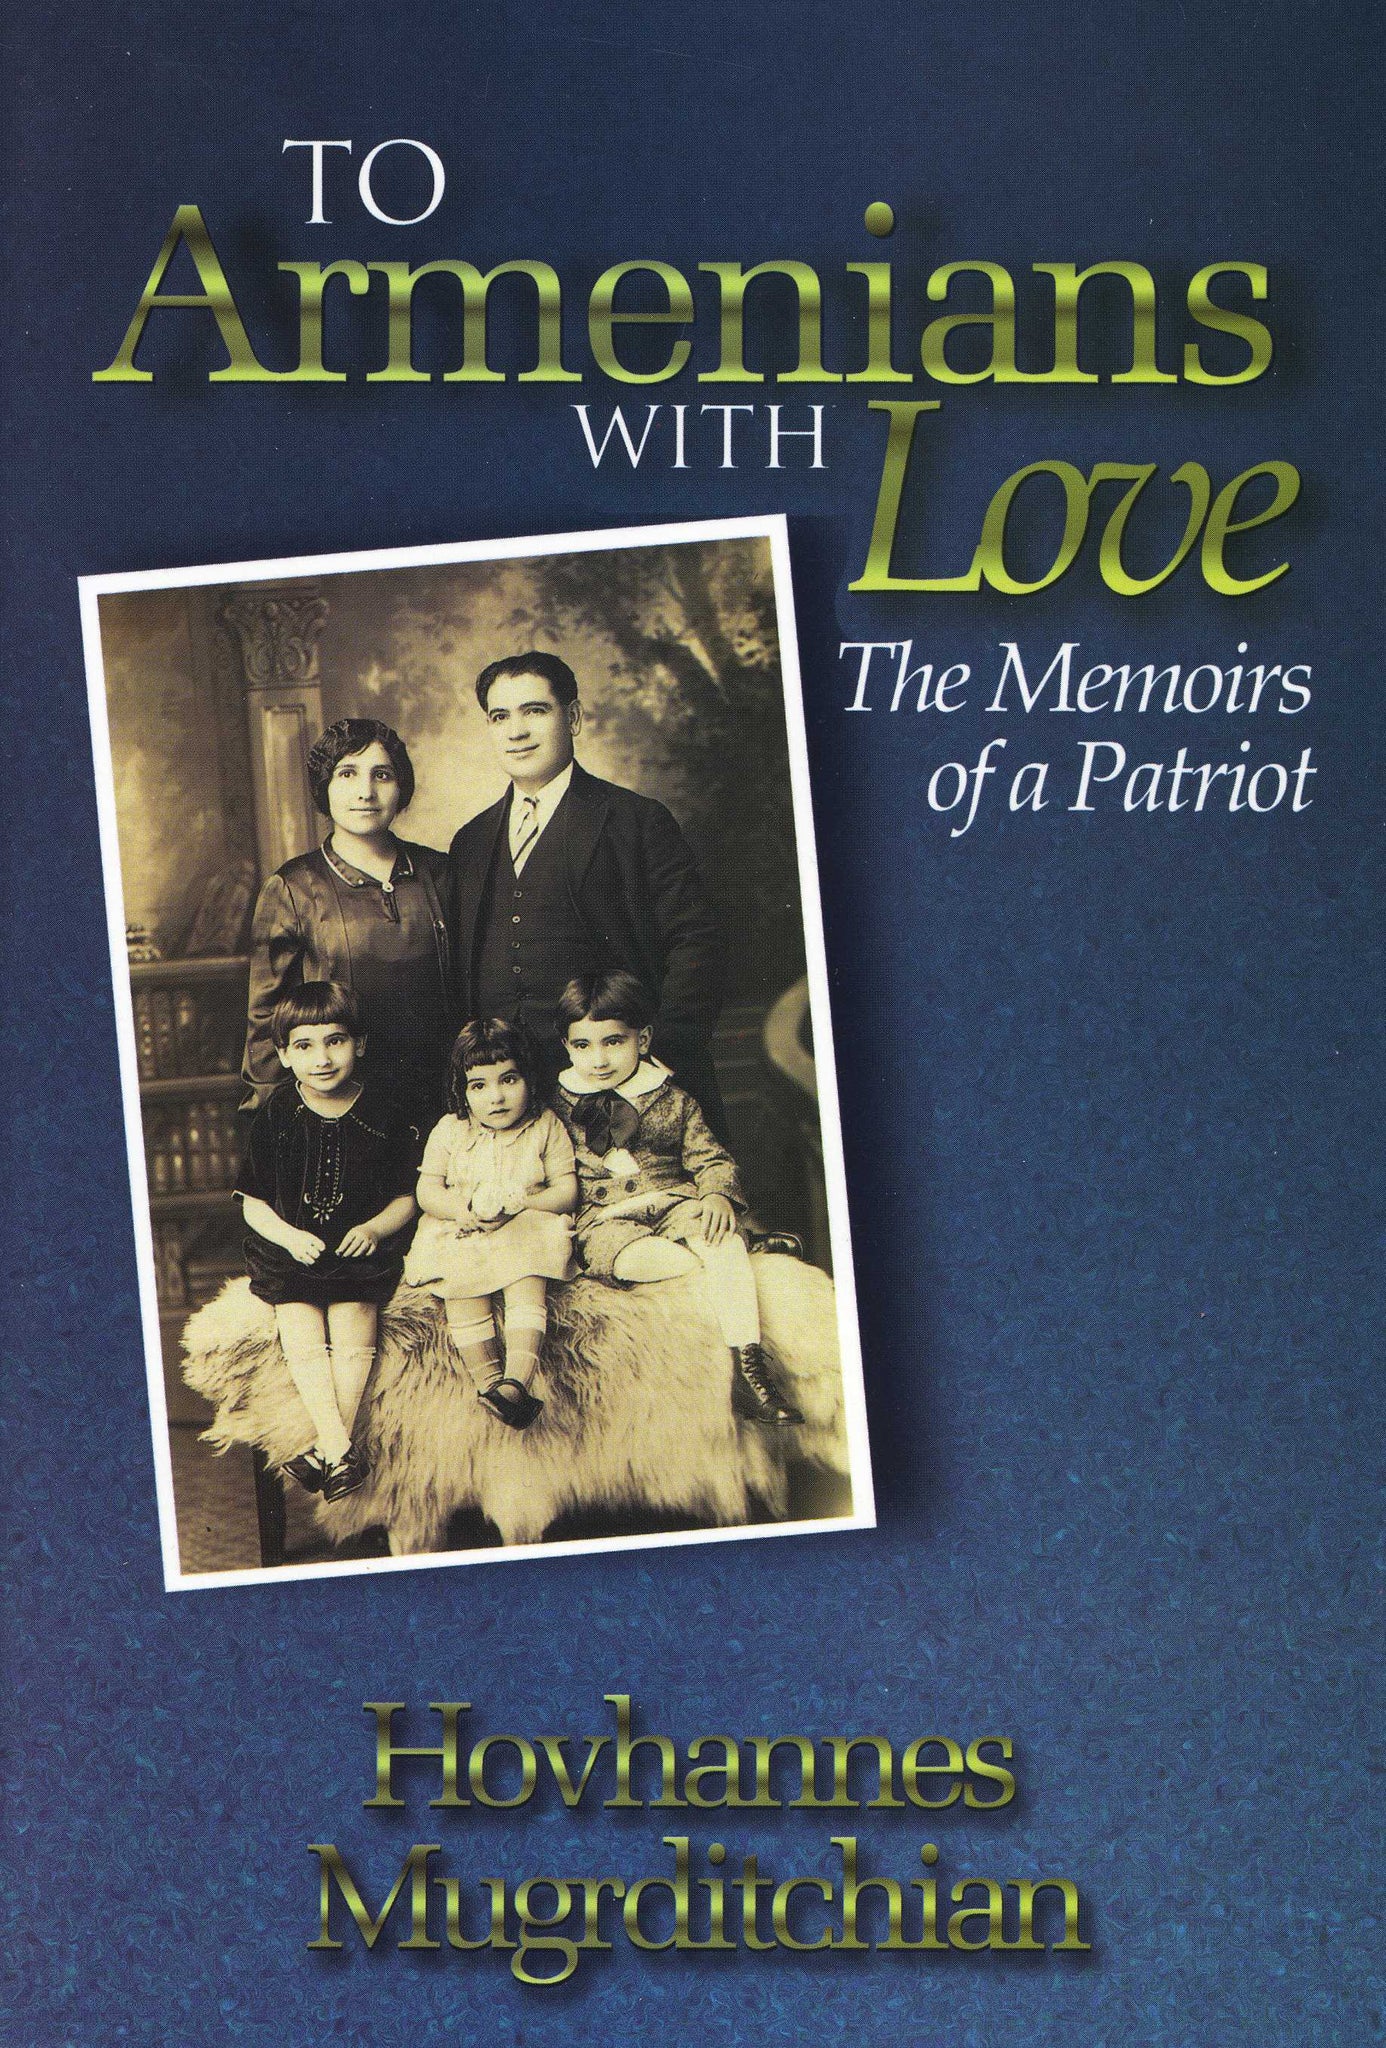 TO ARMENIANS WITH LOVE: The Memoirs of a Patriot